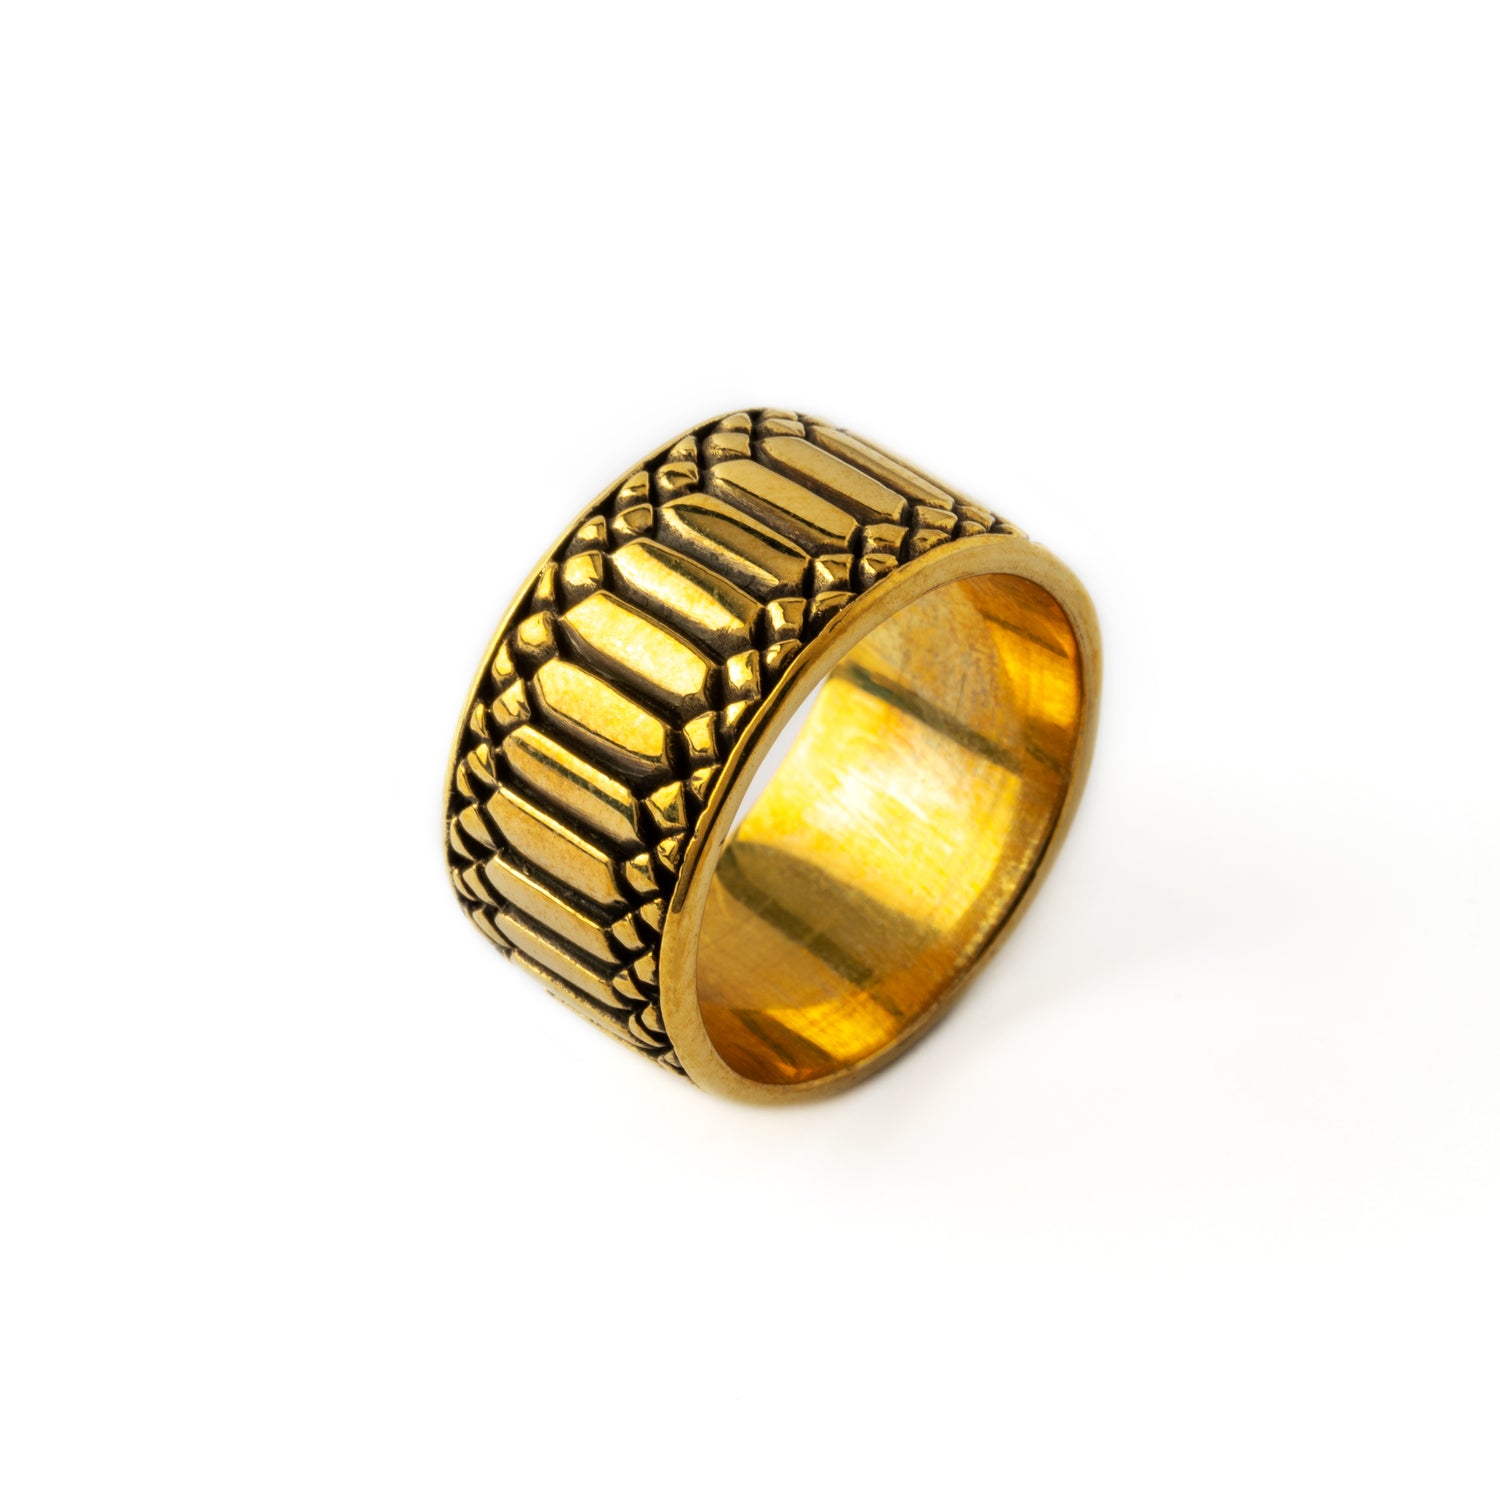 Apophis Rebirth golden brass thick band ring with geometric pattern side view